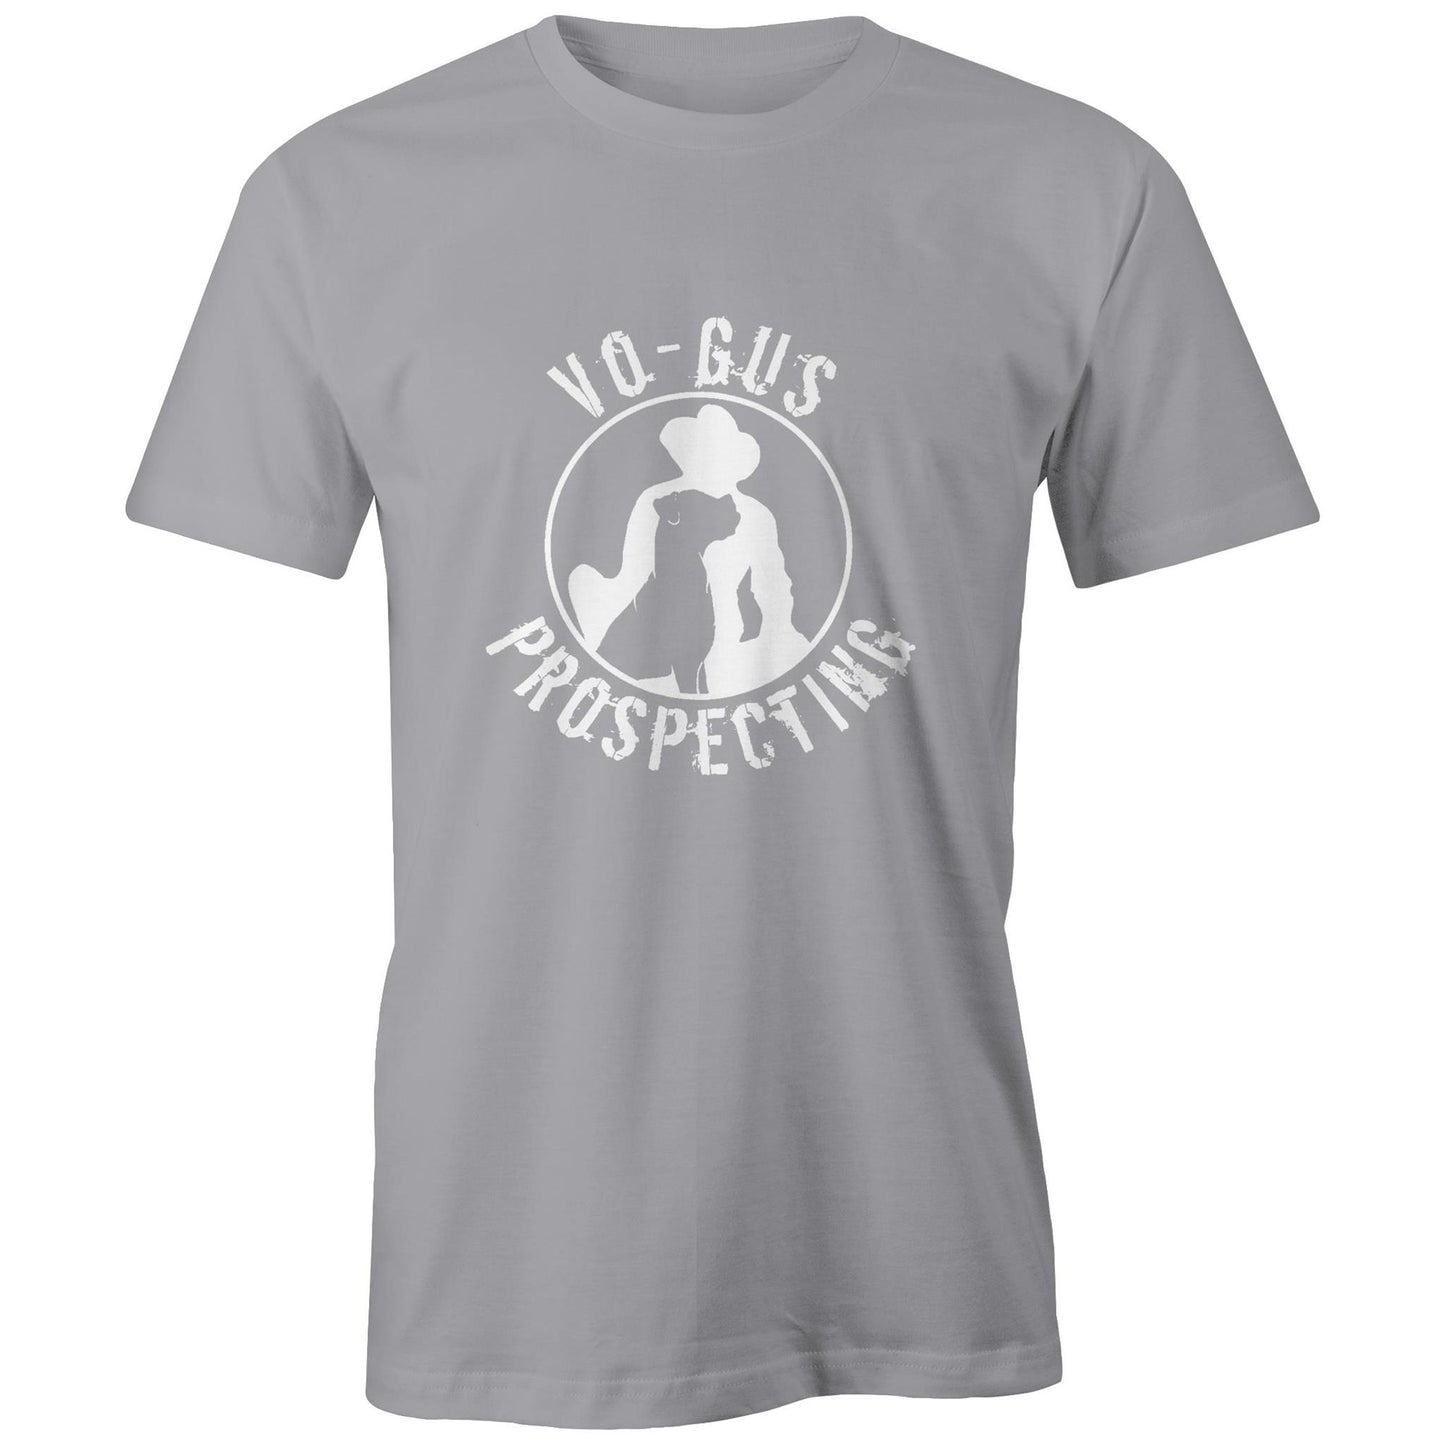 Vo-Gus Prospecting (AS Colour - Classic Tee)